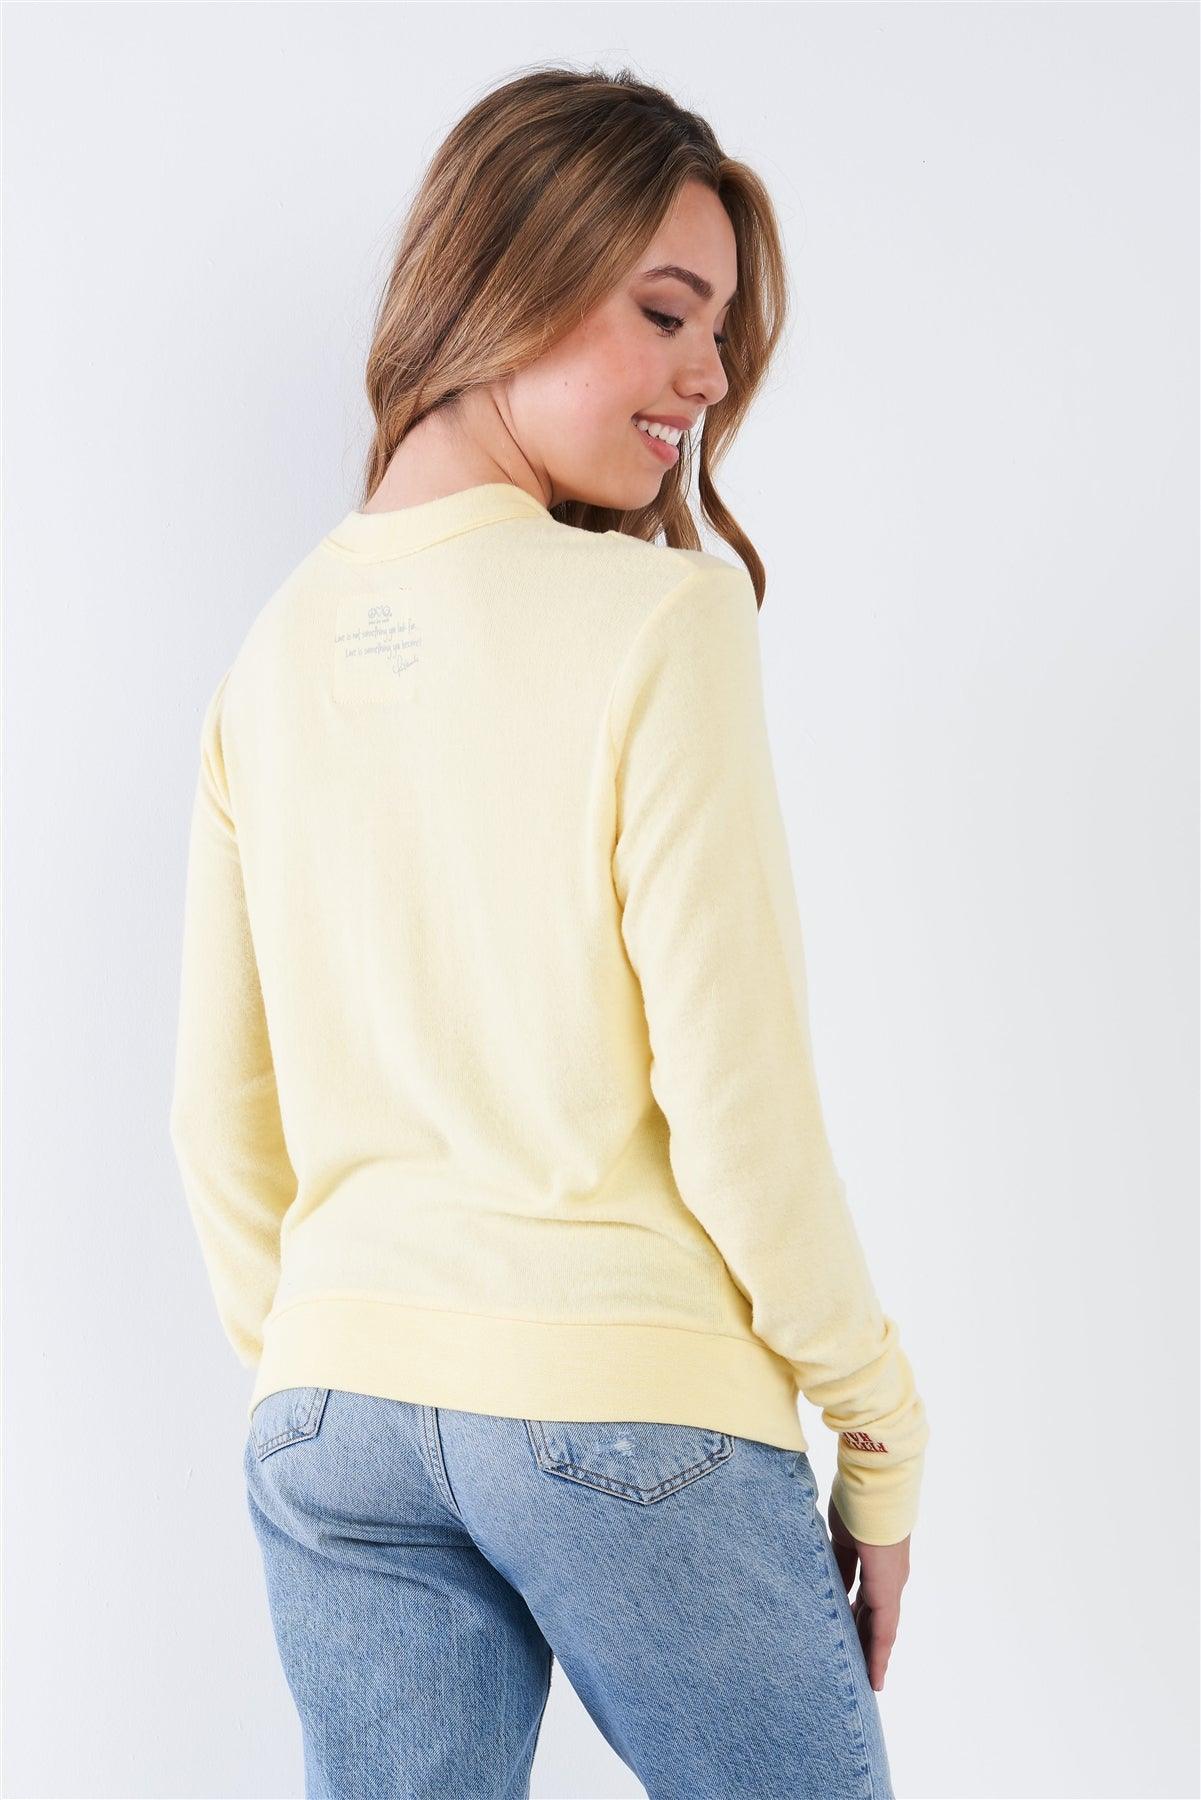 Pale Banana Long Sleeve Lace Up Front Top